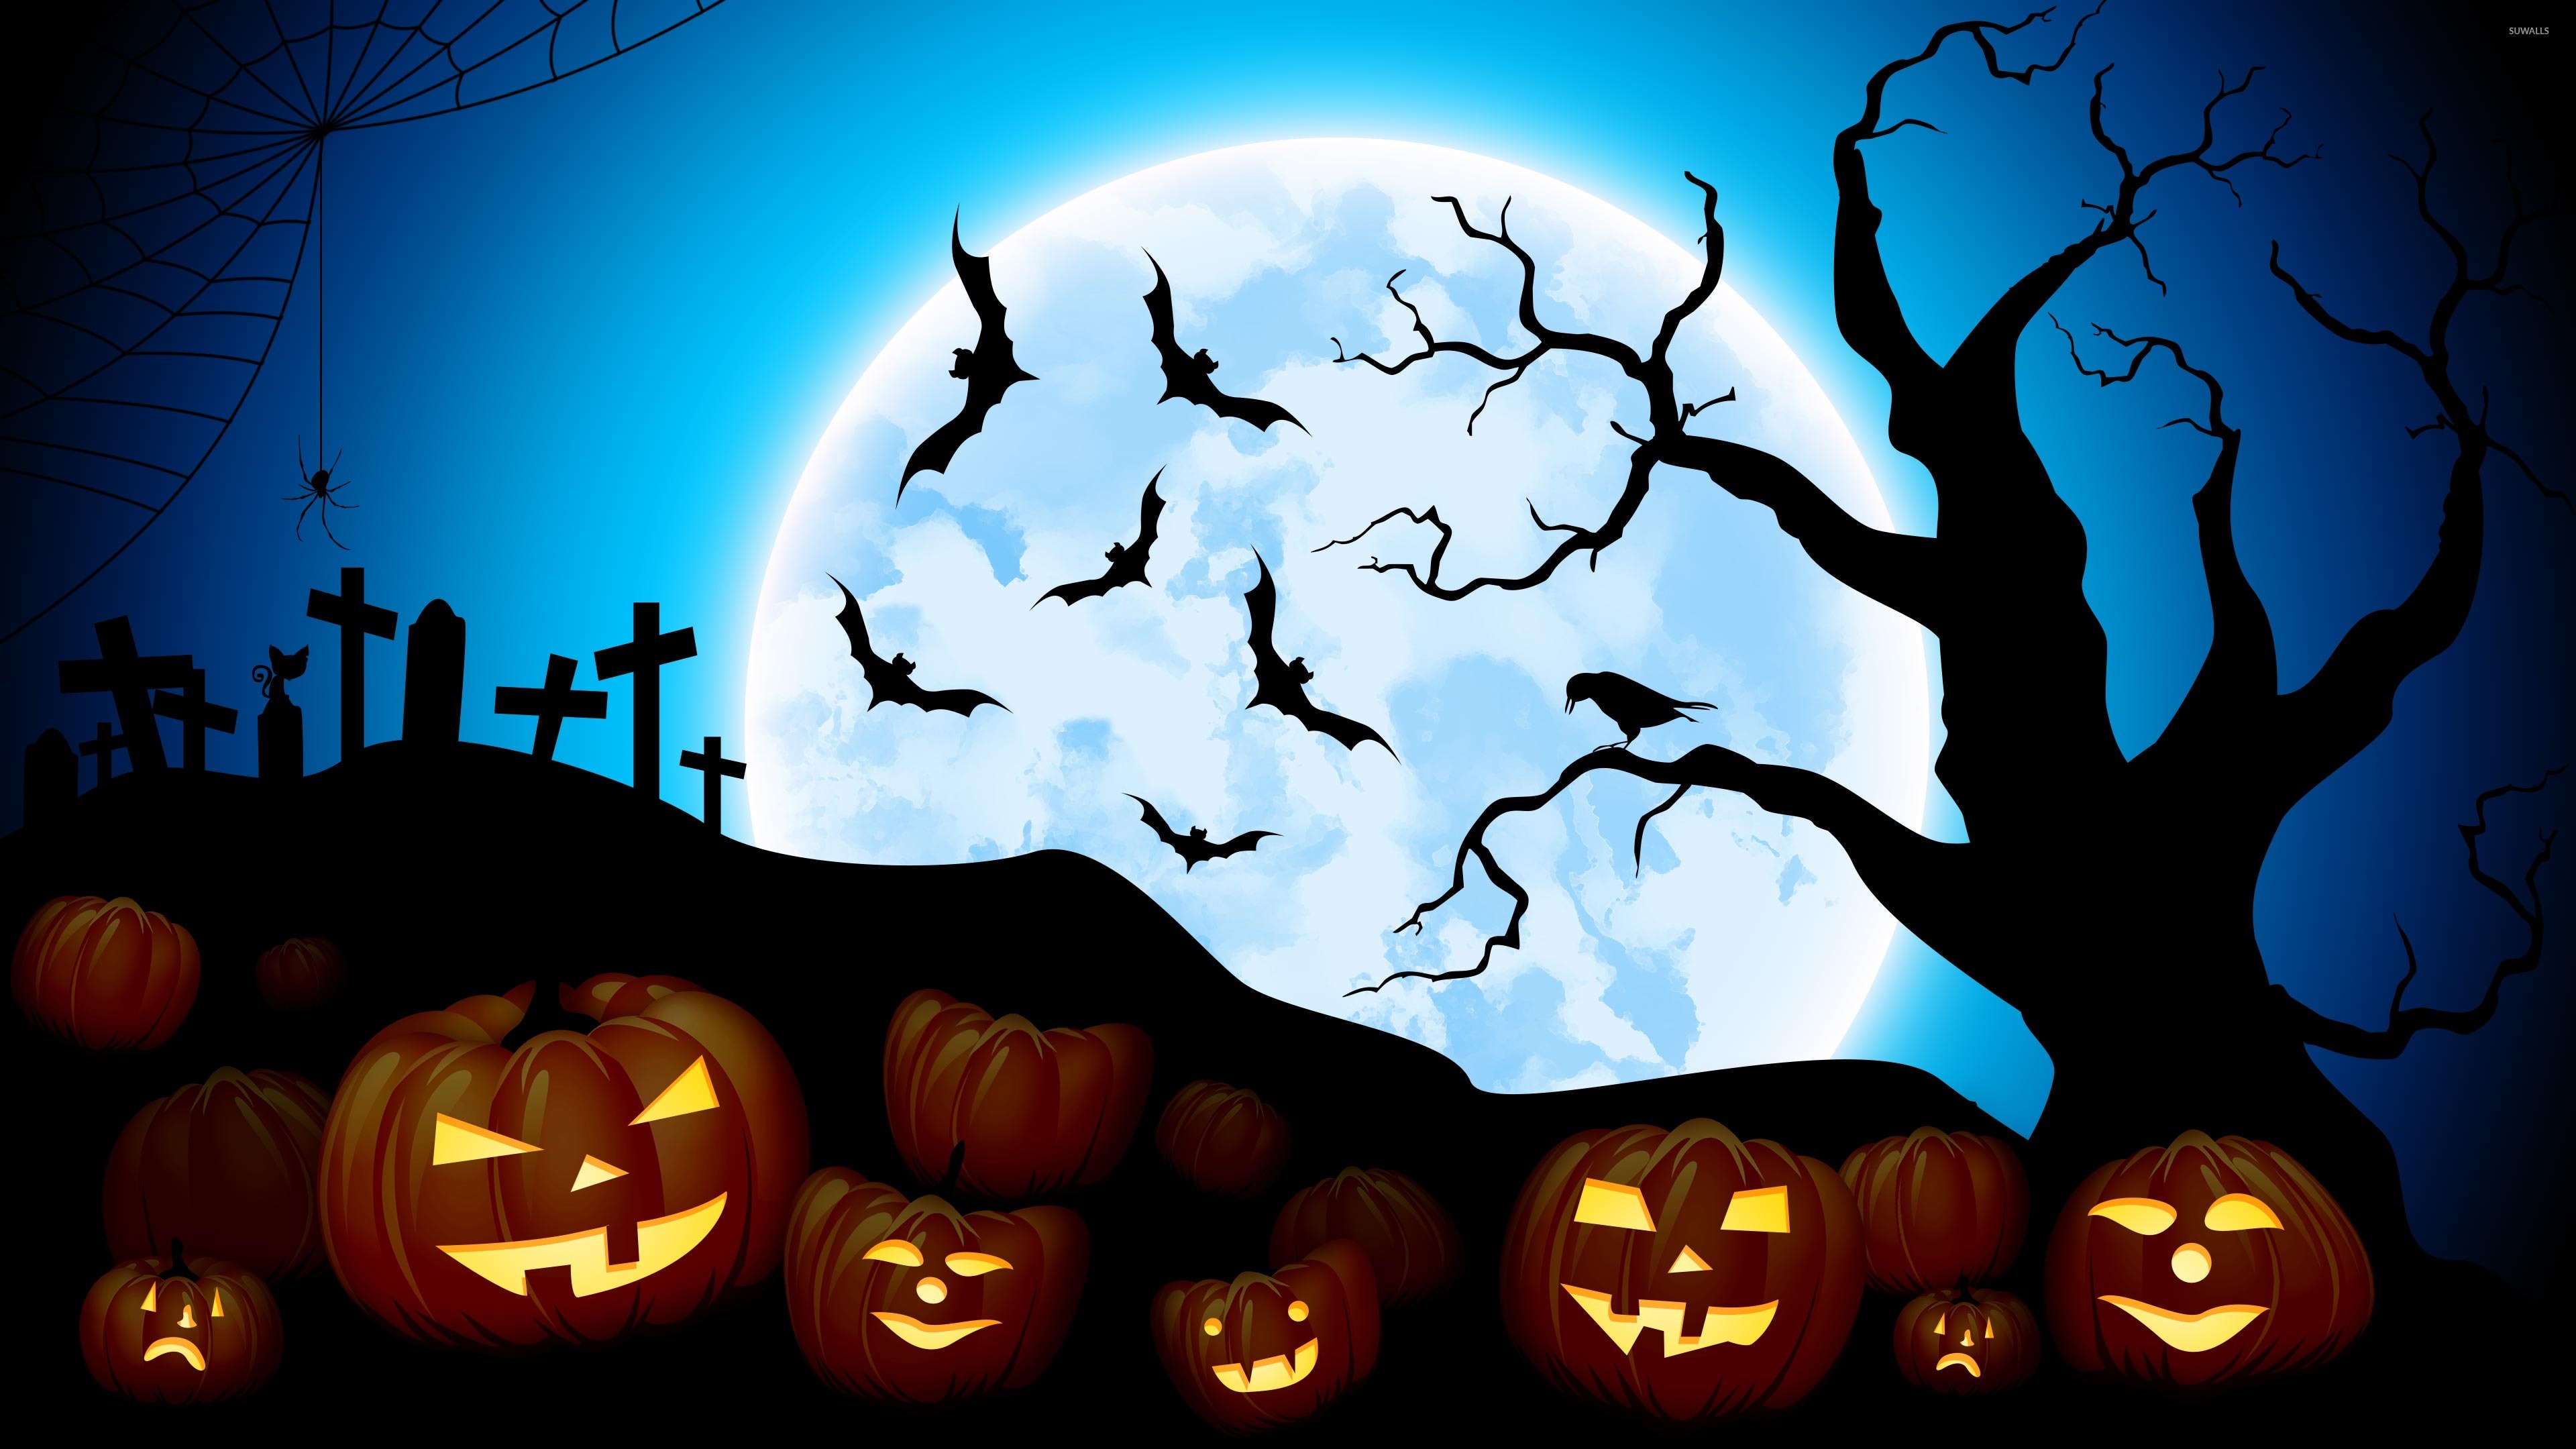 Jack-o'-lanterns in the blue full moon wallpaper - Holiday wallpapers ...